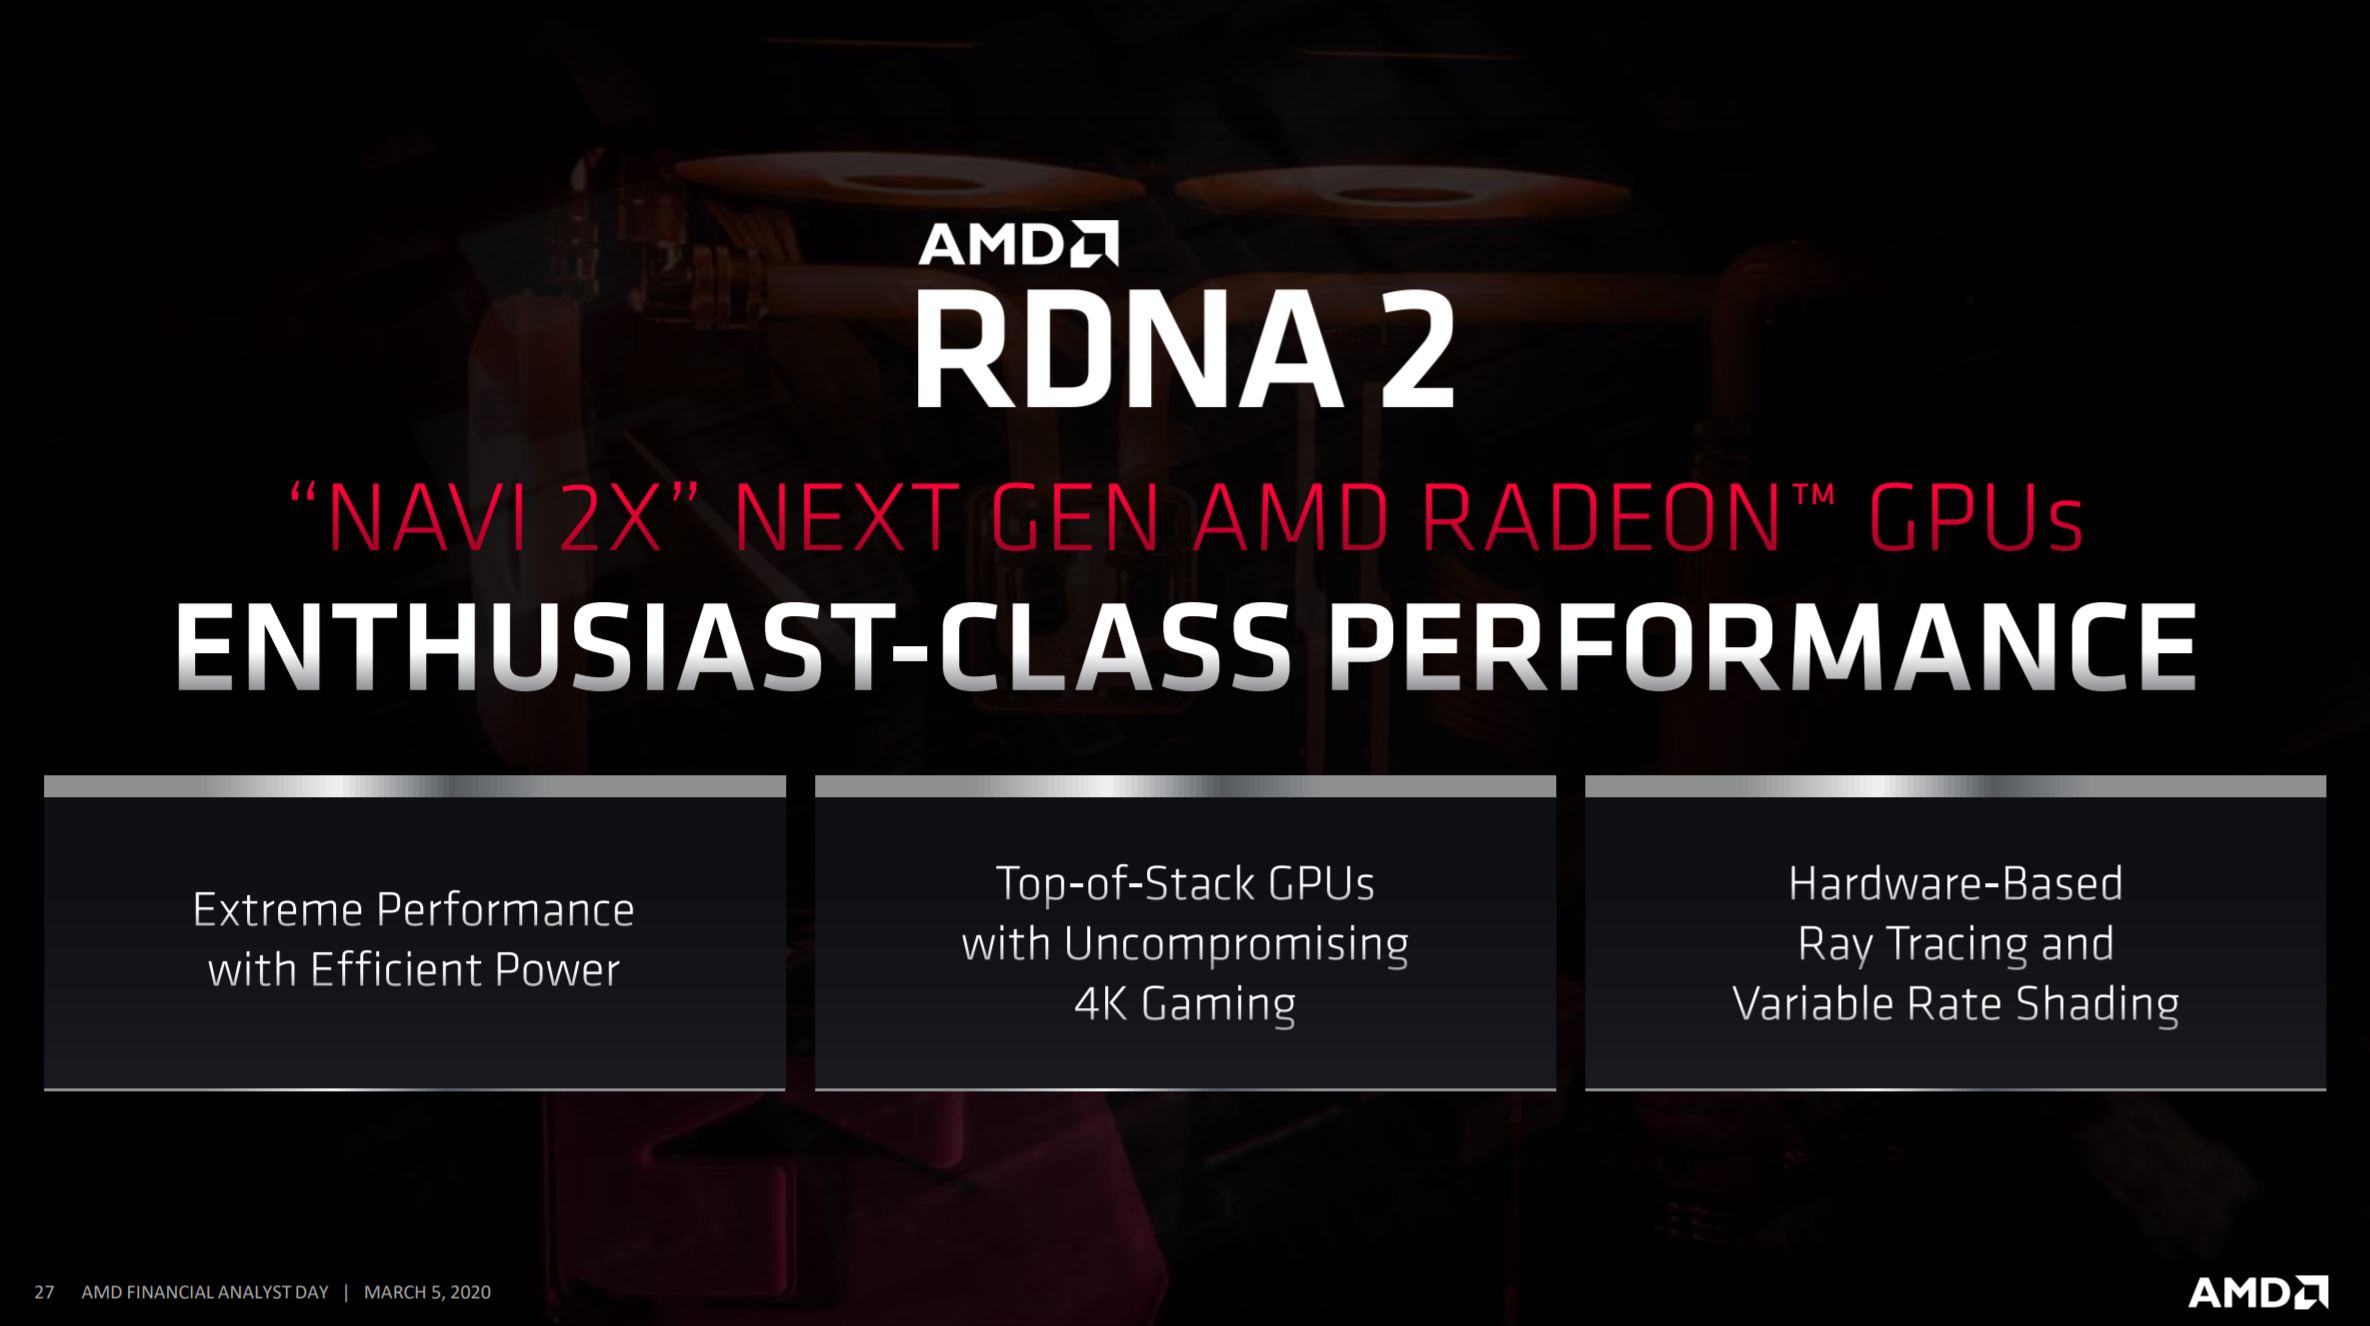 Media asset in full size related to 3dfxzone.it news item entitled as follows: AMD RDNA 2, presto Navi con ray tracing e variable rate shading, poi RDNA 3 | Image Name: news30525_AMD-Architetture-Grafiche_2.jpg